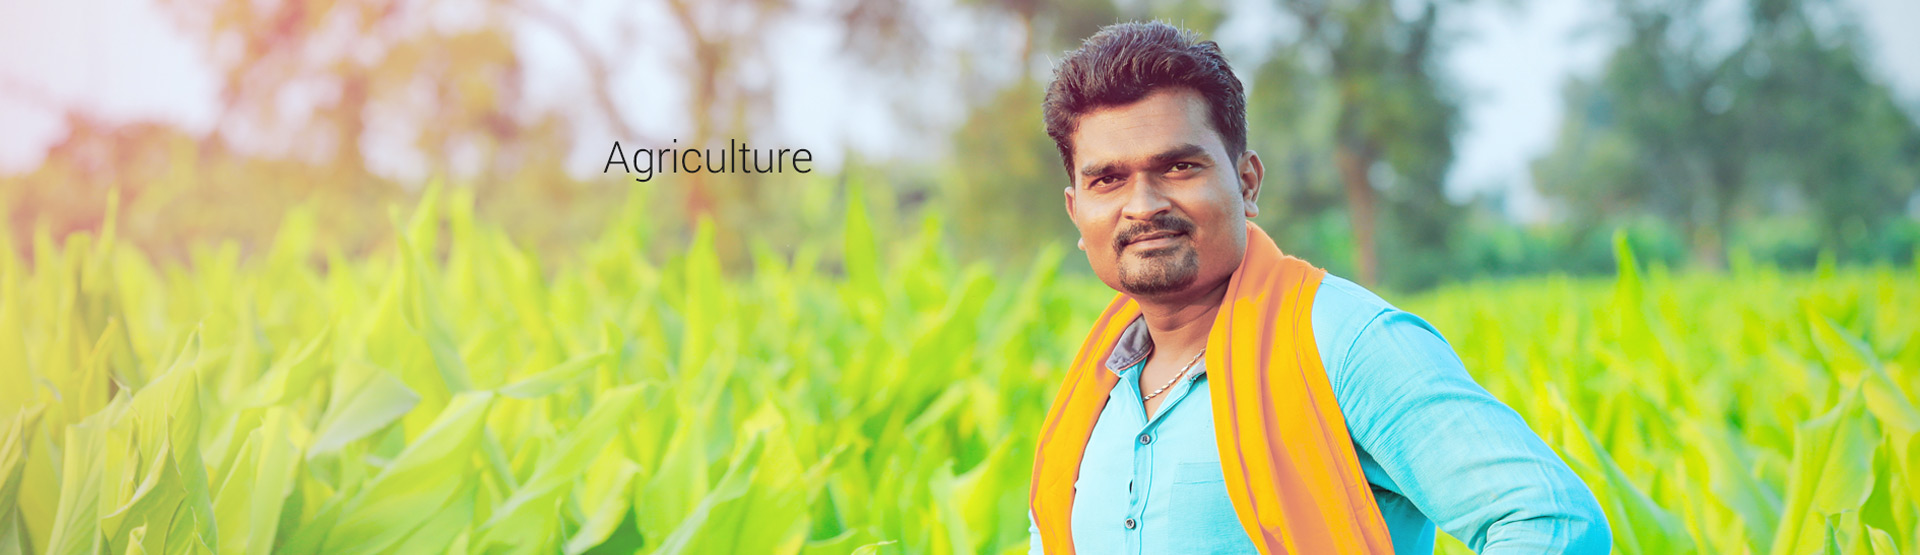 agriculture-banner-1